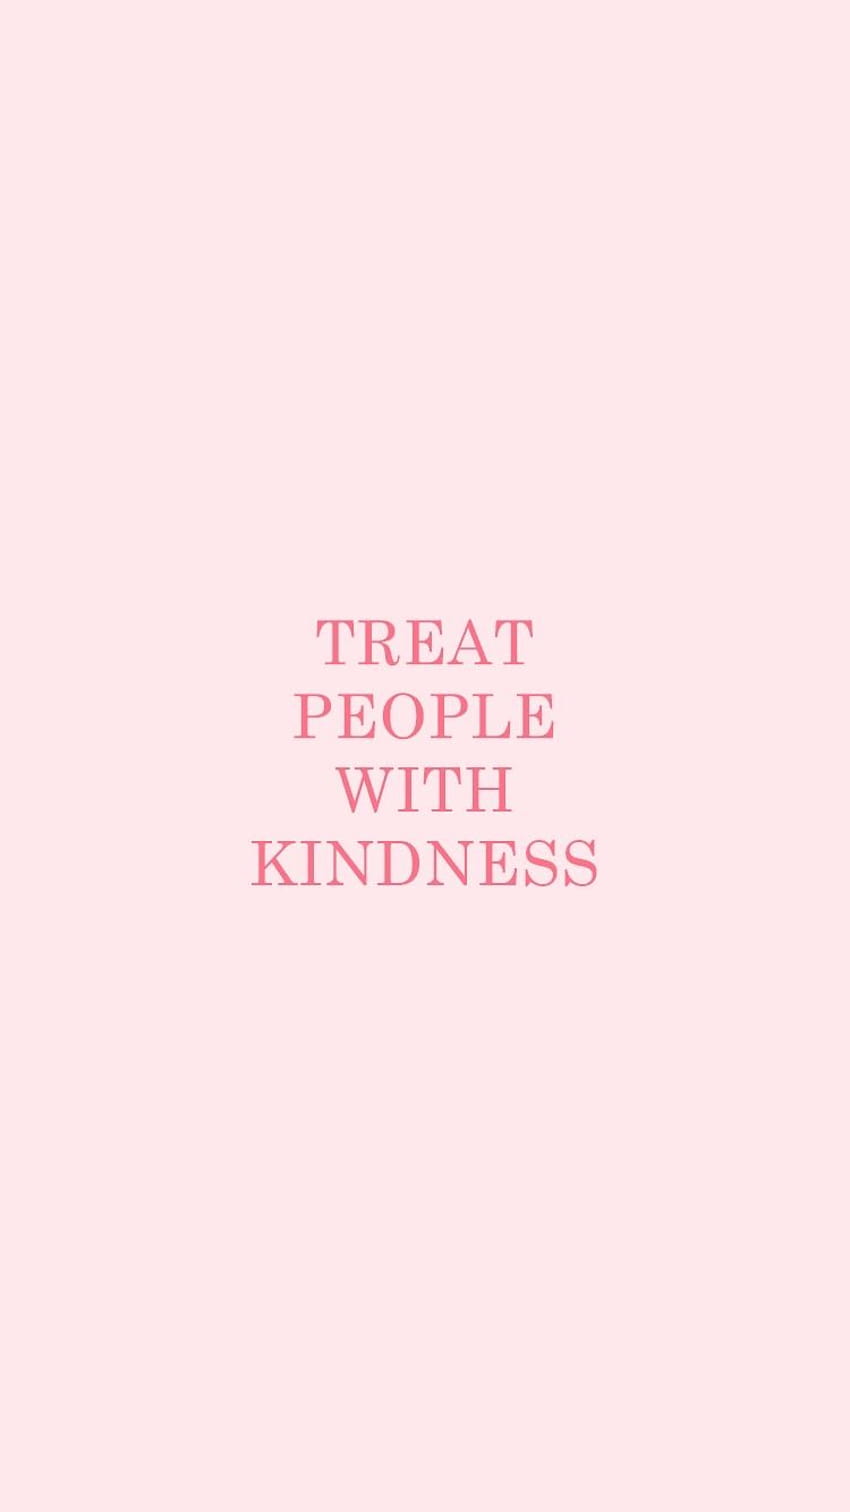 Treat people with kindness by Margot Le Nabec on Dribbble